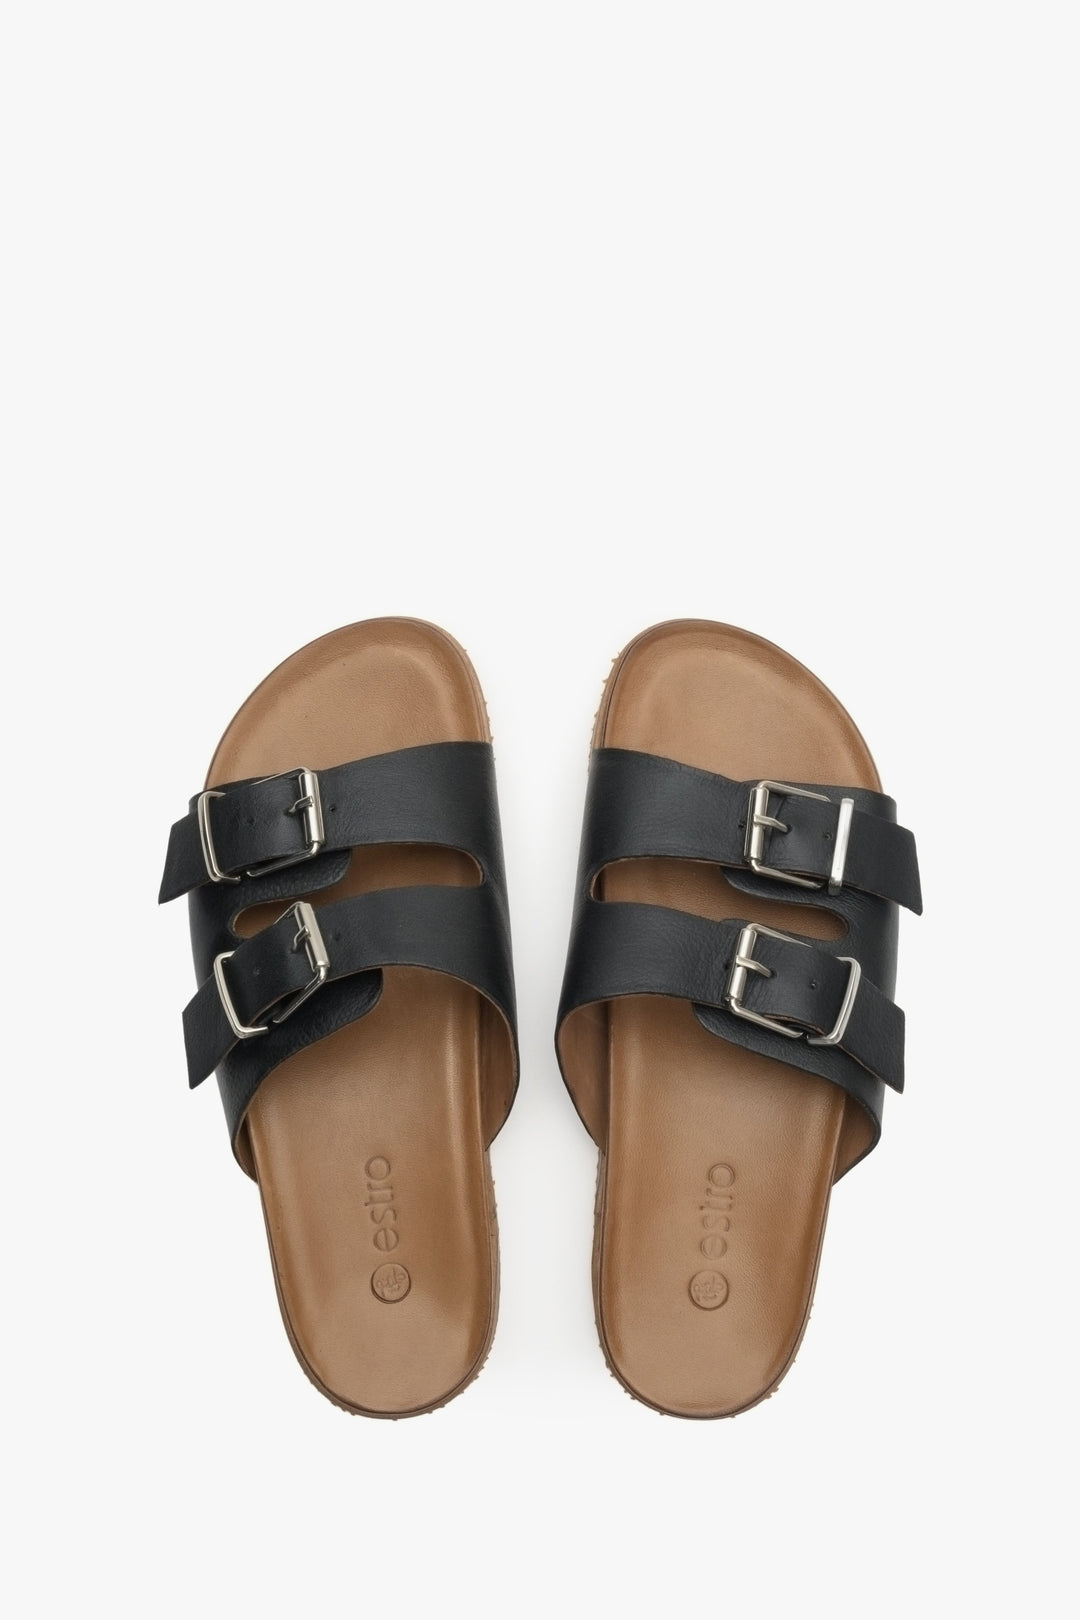 Women's black Estro slide sandals made of Italian natural leather - presentation of shoes from above.